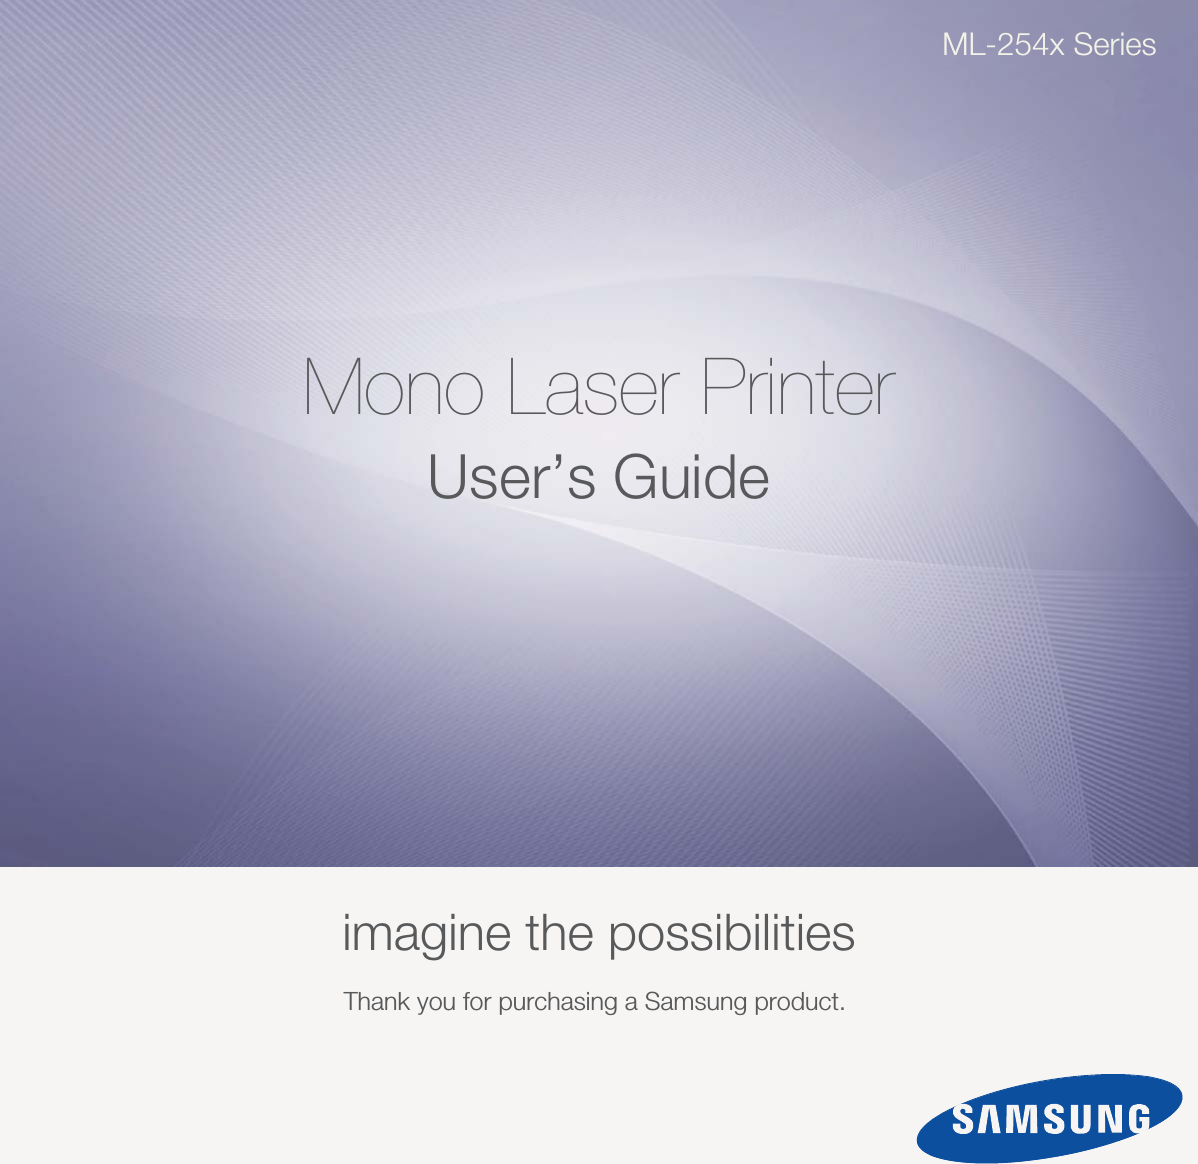 ML-254x SeriesMono Laser PrinterUser’s Guideimagine the possibilitiesThank you for purchasing a Samsung product. 